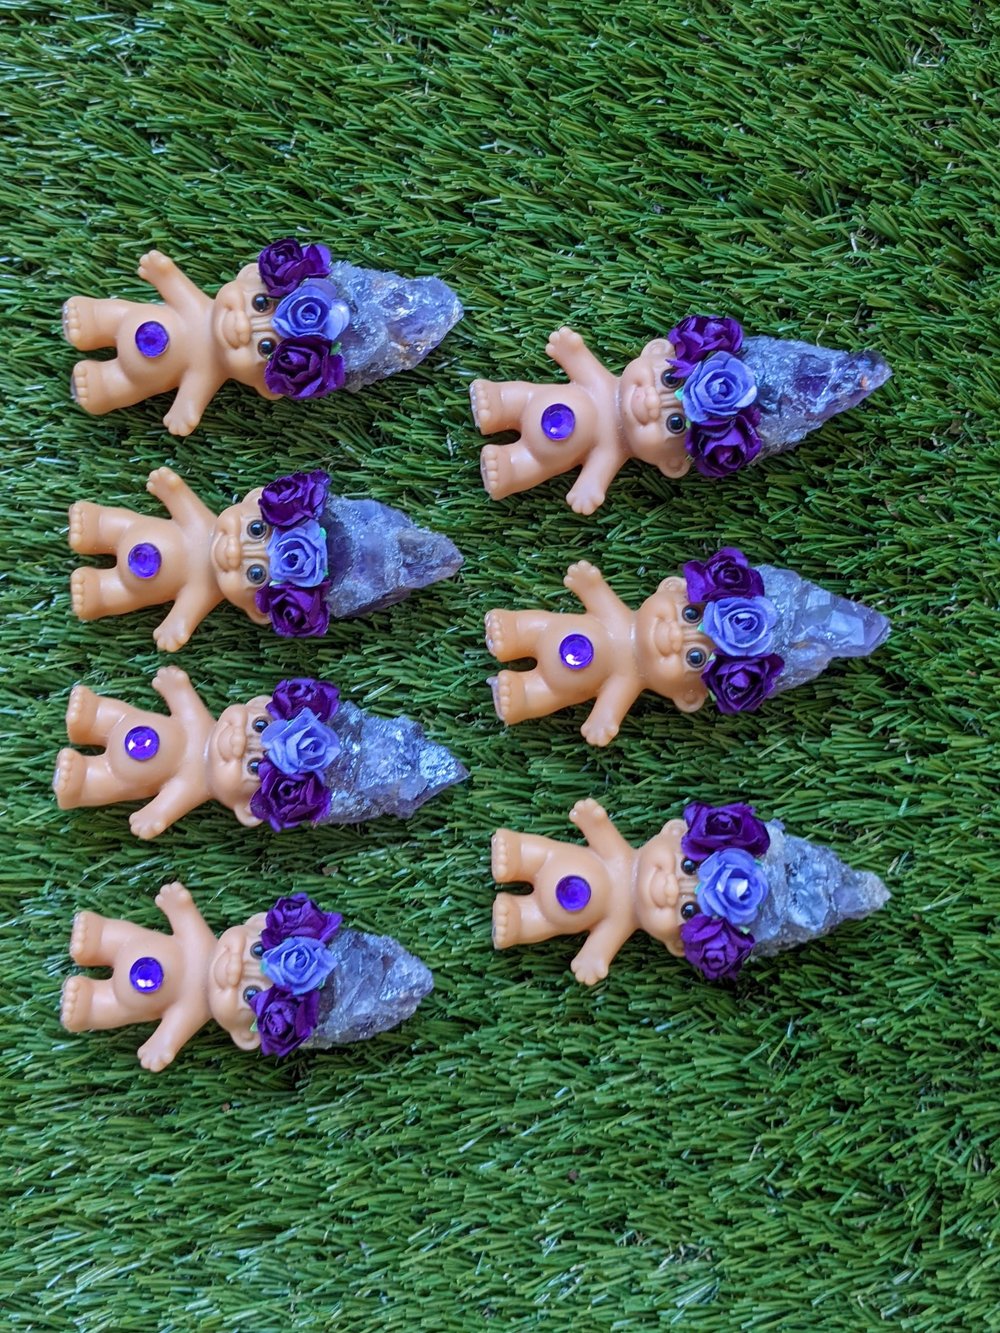 MADE TO ORDER: Amethyst Crystal Troll Shorty with Purple Flower Crown 4"